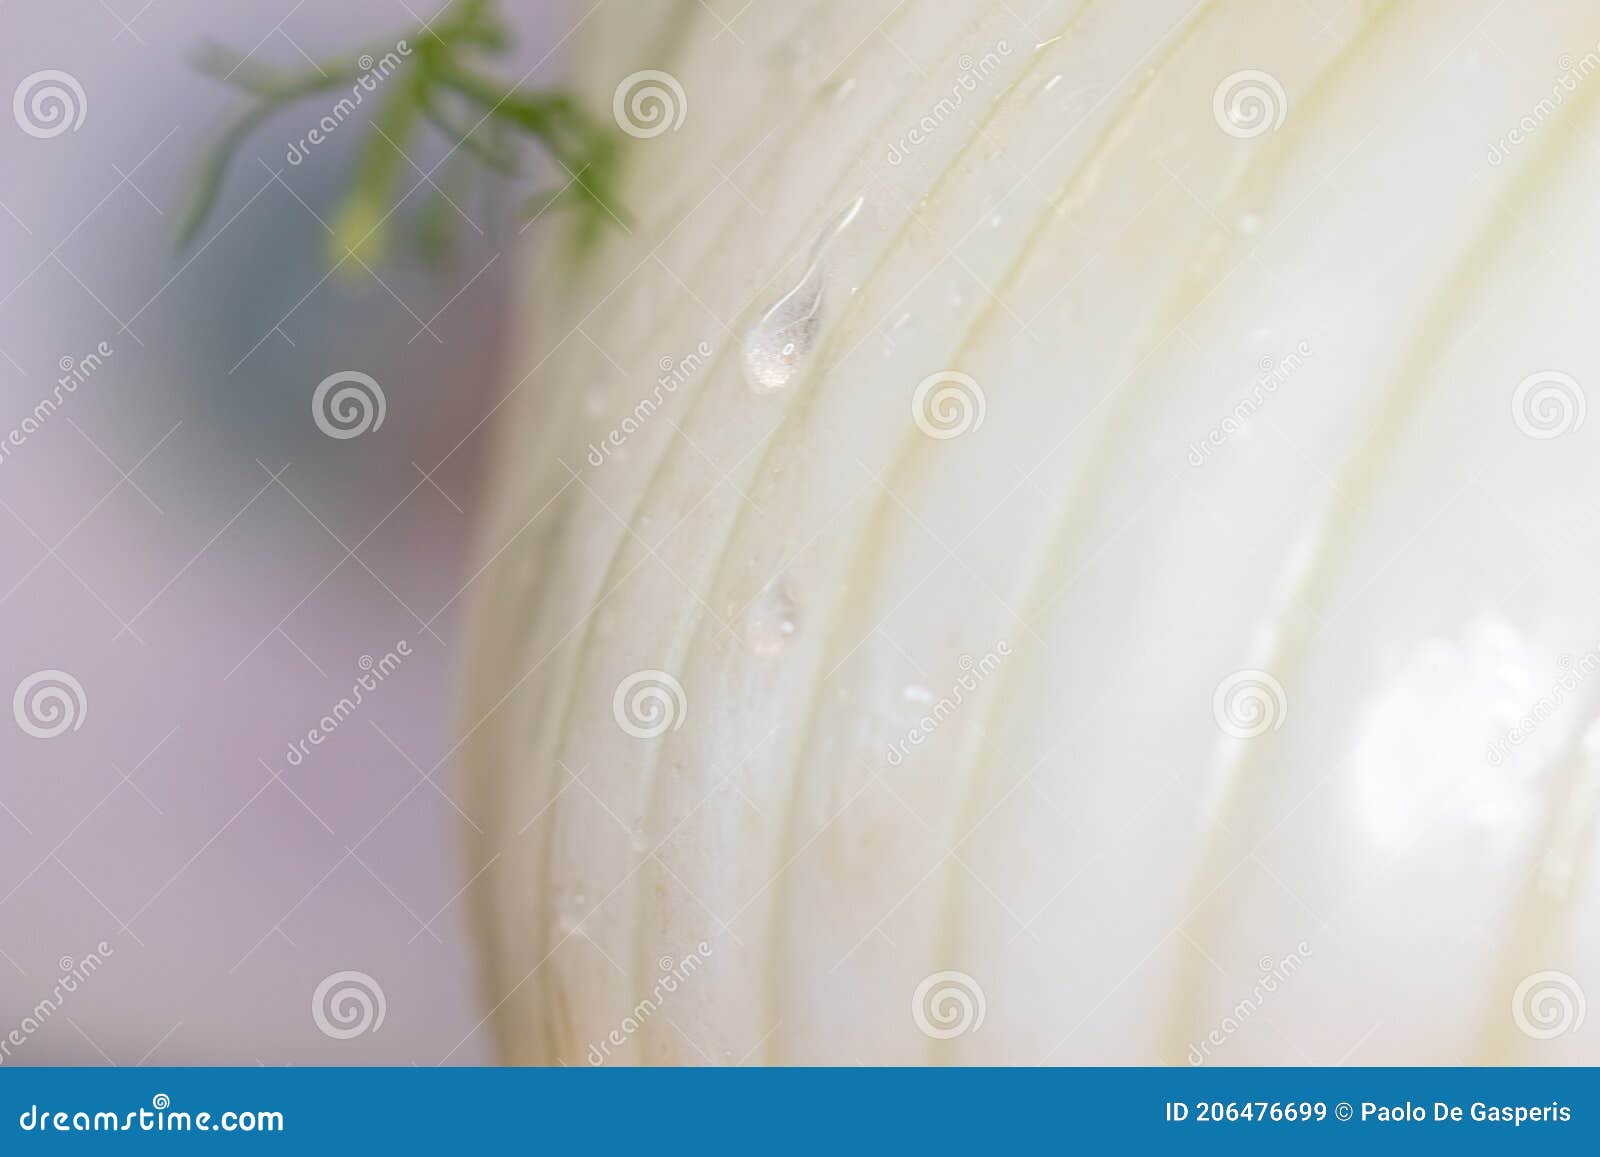 drop of water on fennel. macro close up of water drops on fresh fennl surface. healty vegano food